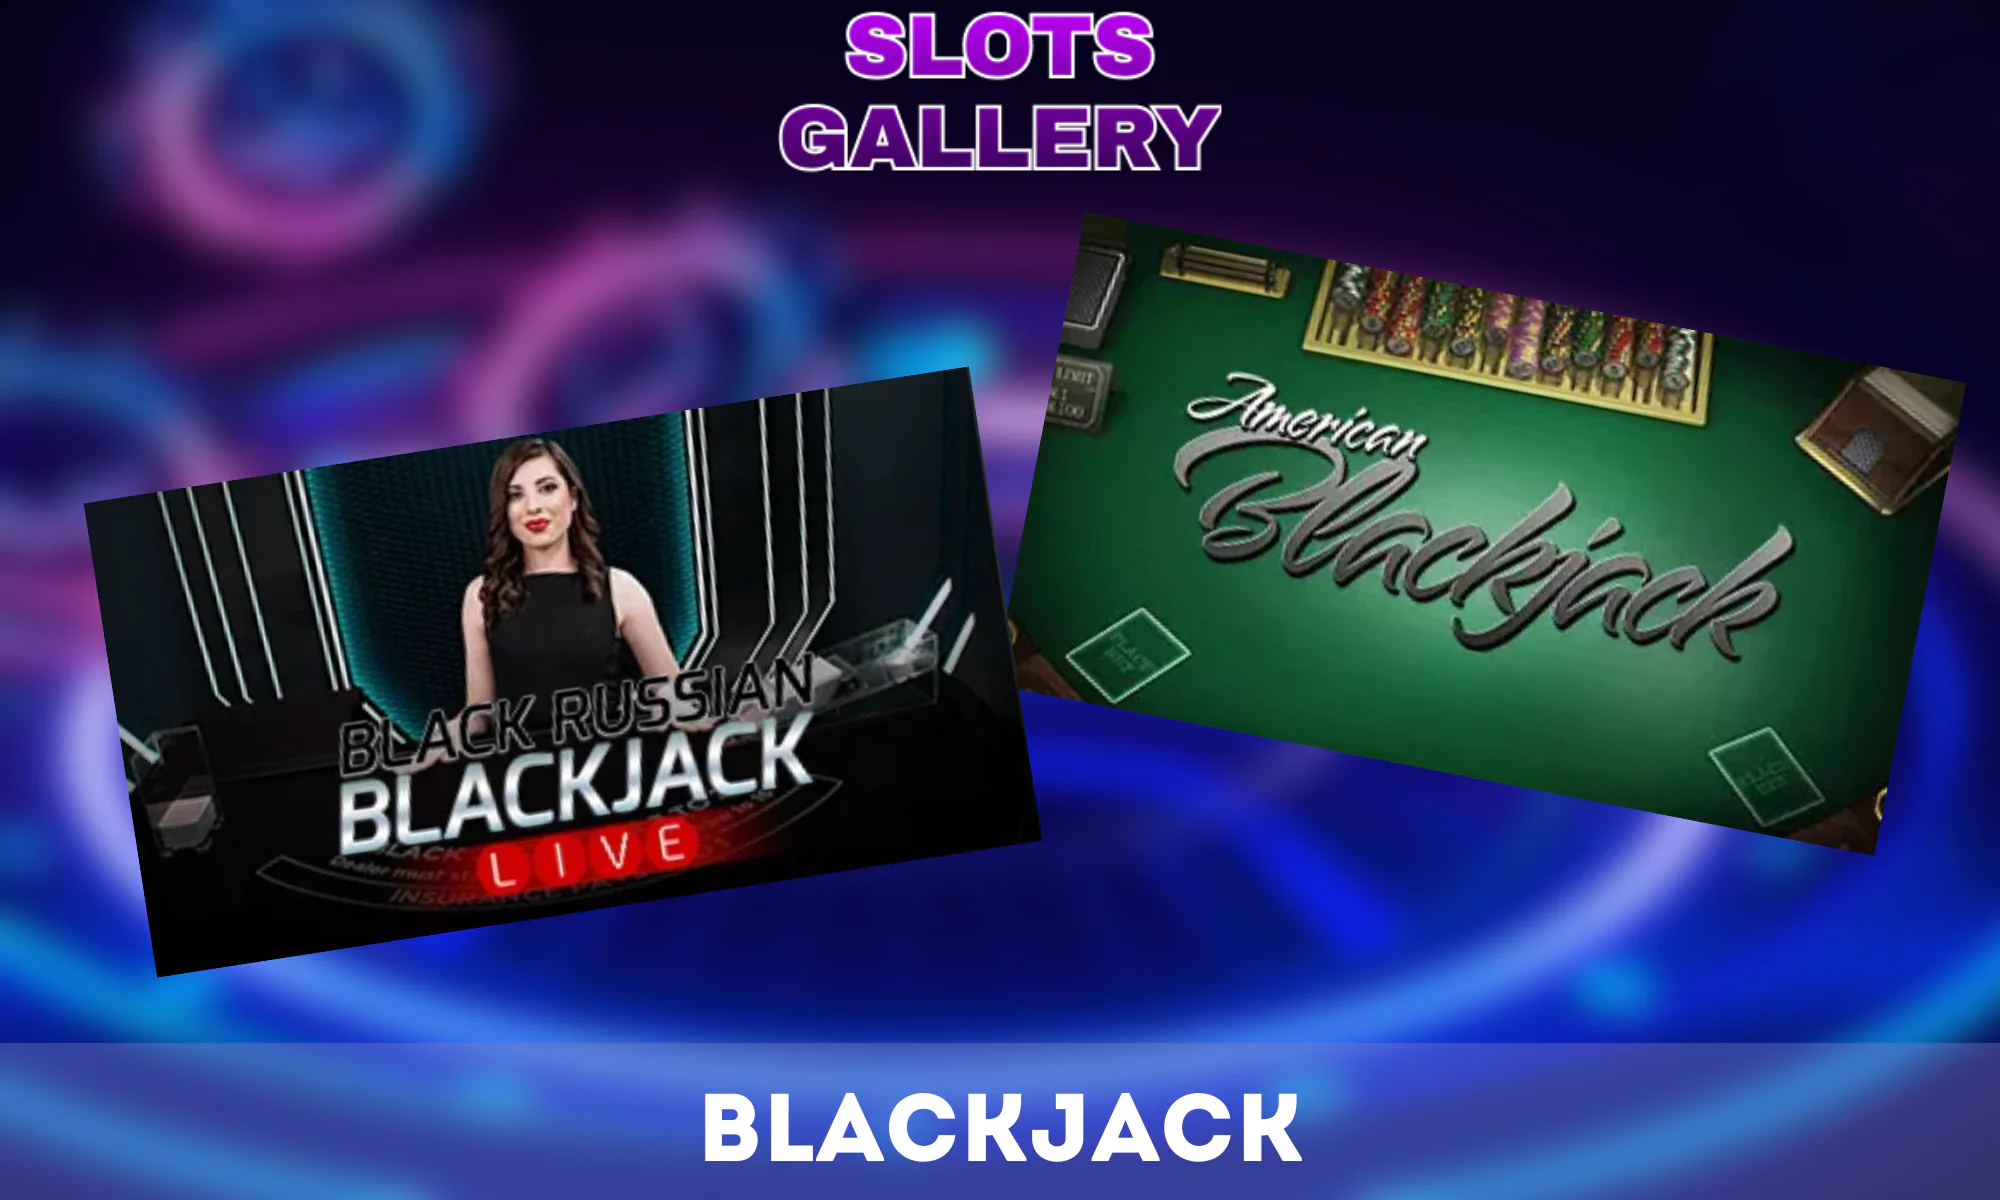 The Slots gallery website offers different versions of blackjack